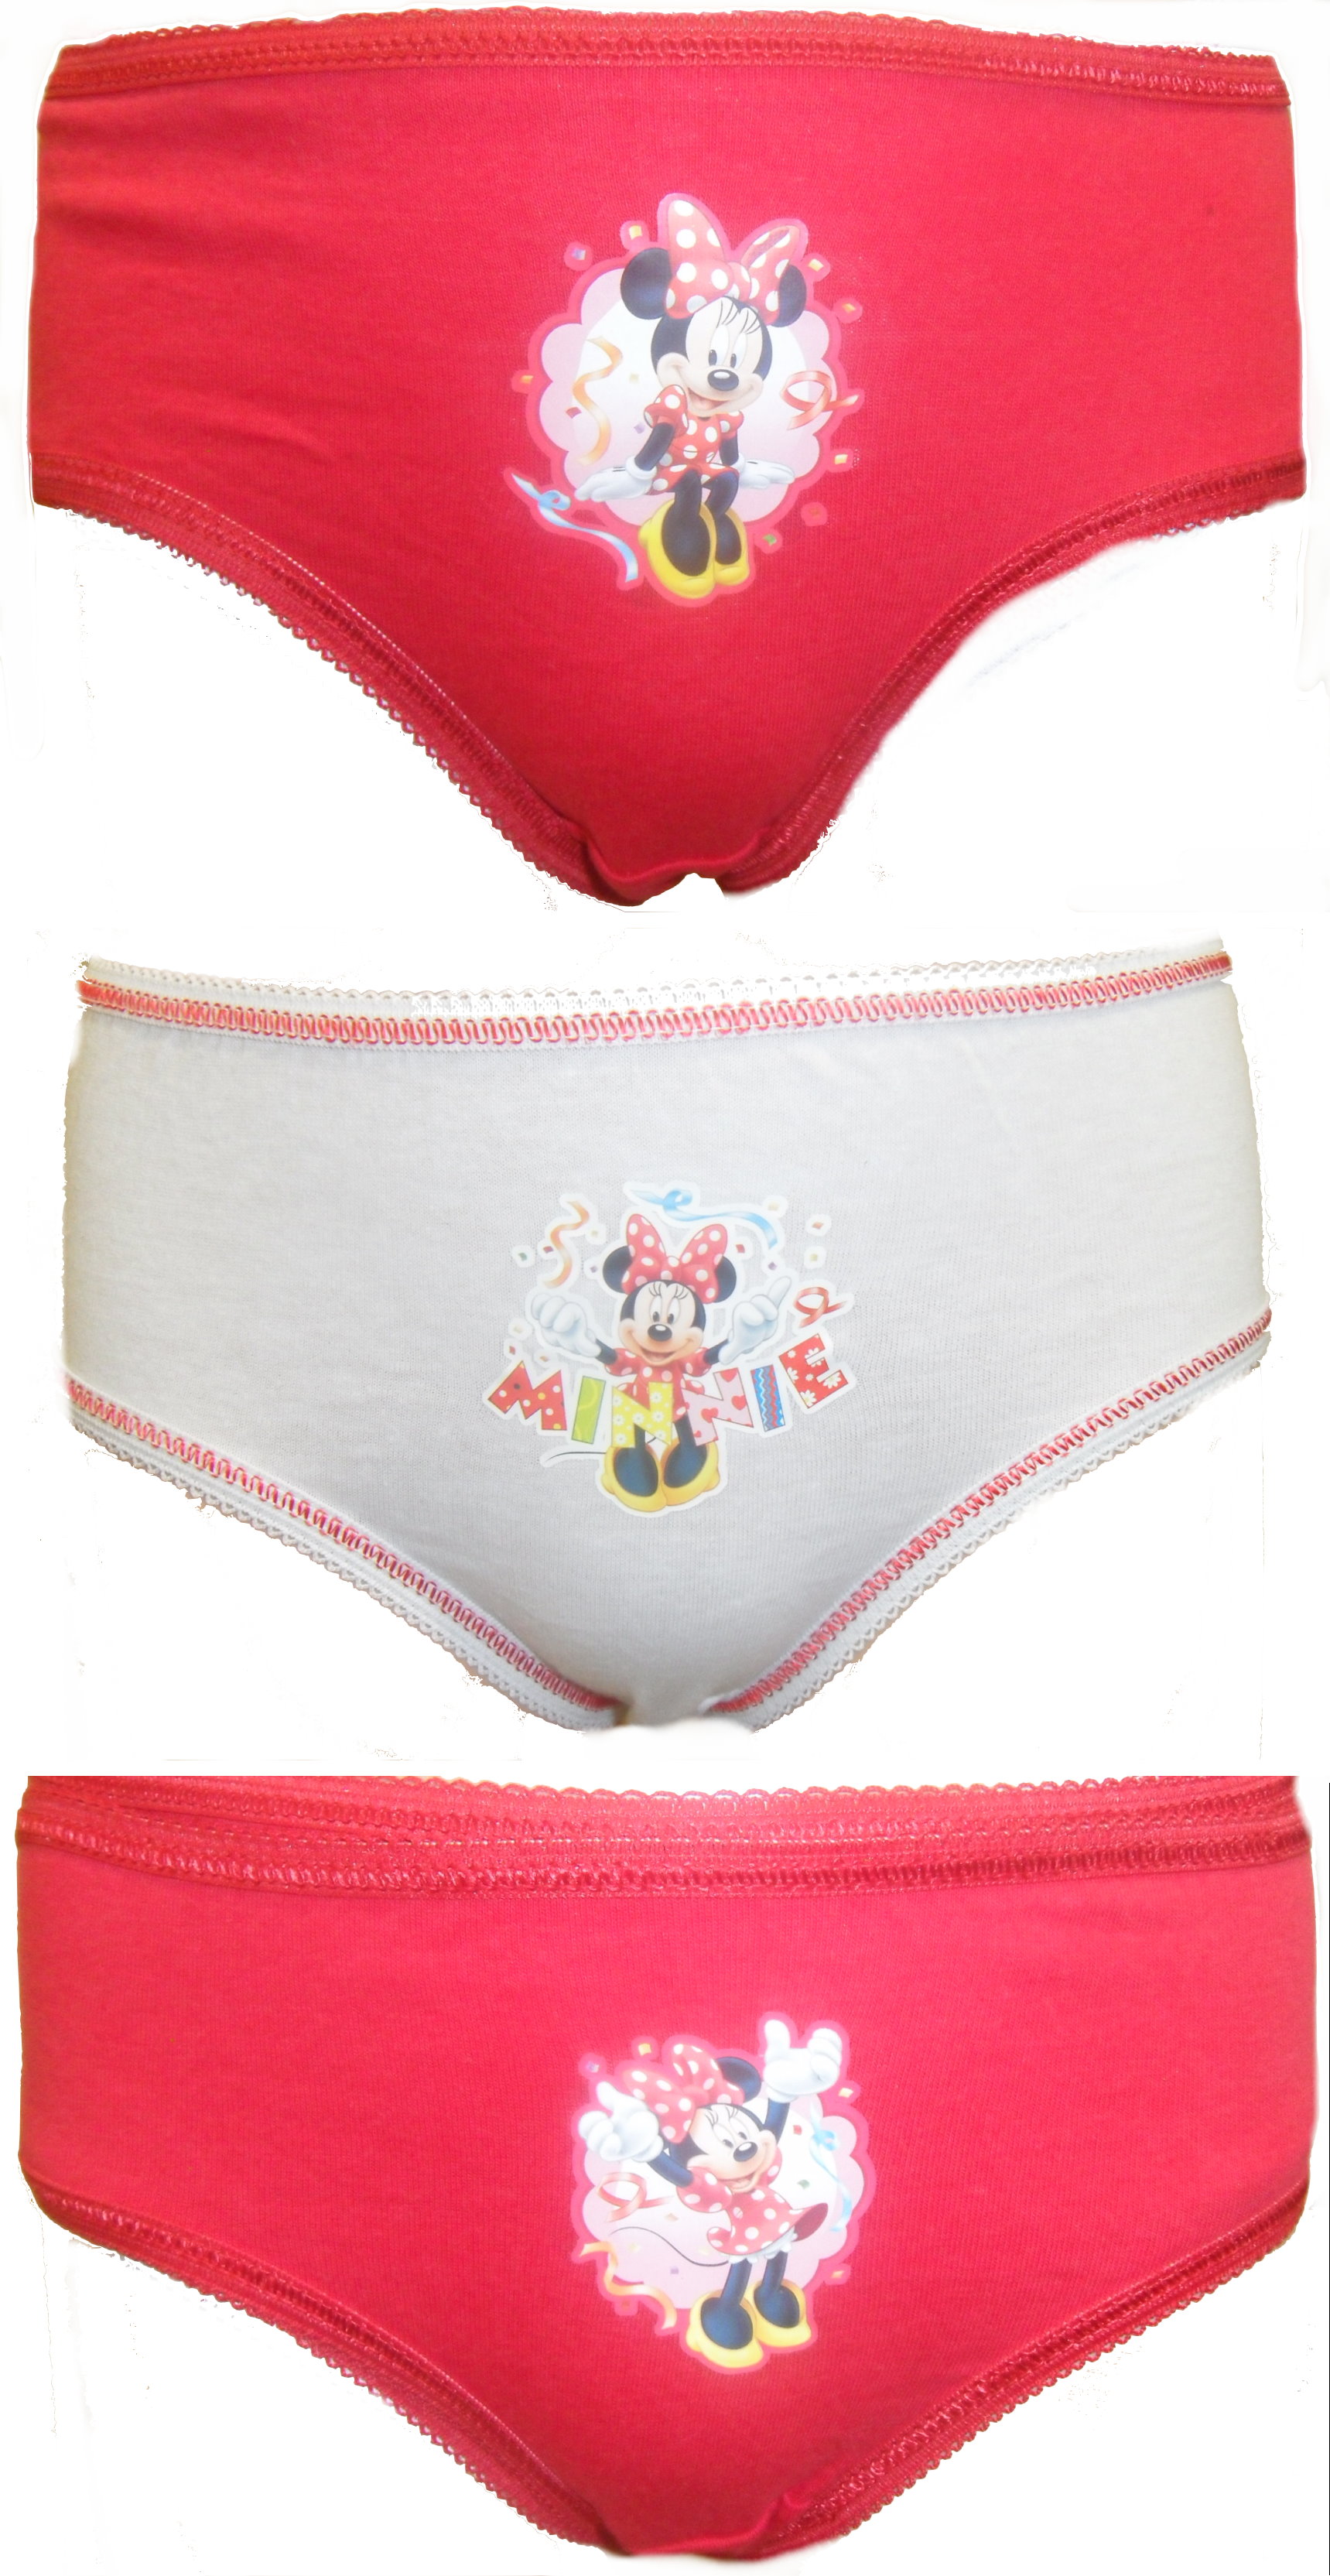 Minnie mouse Briefs GUW01B_RED.jpg  by Thingimijigs